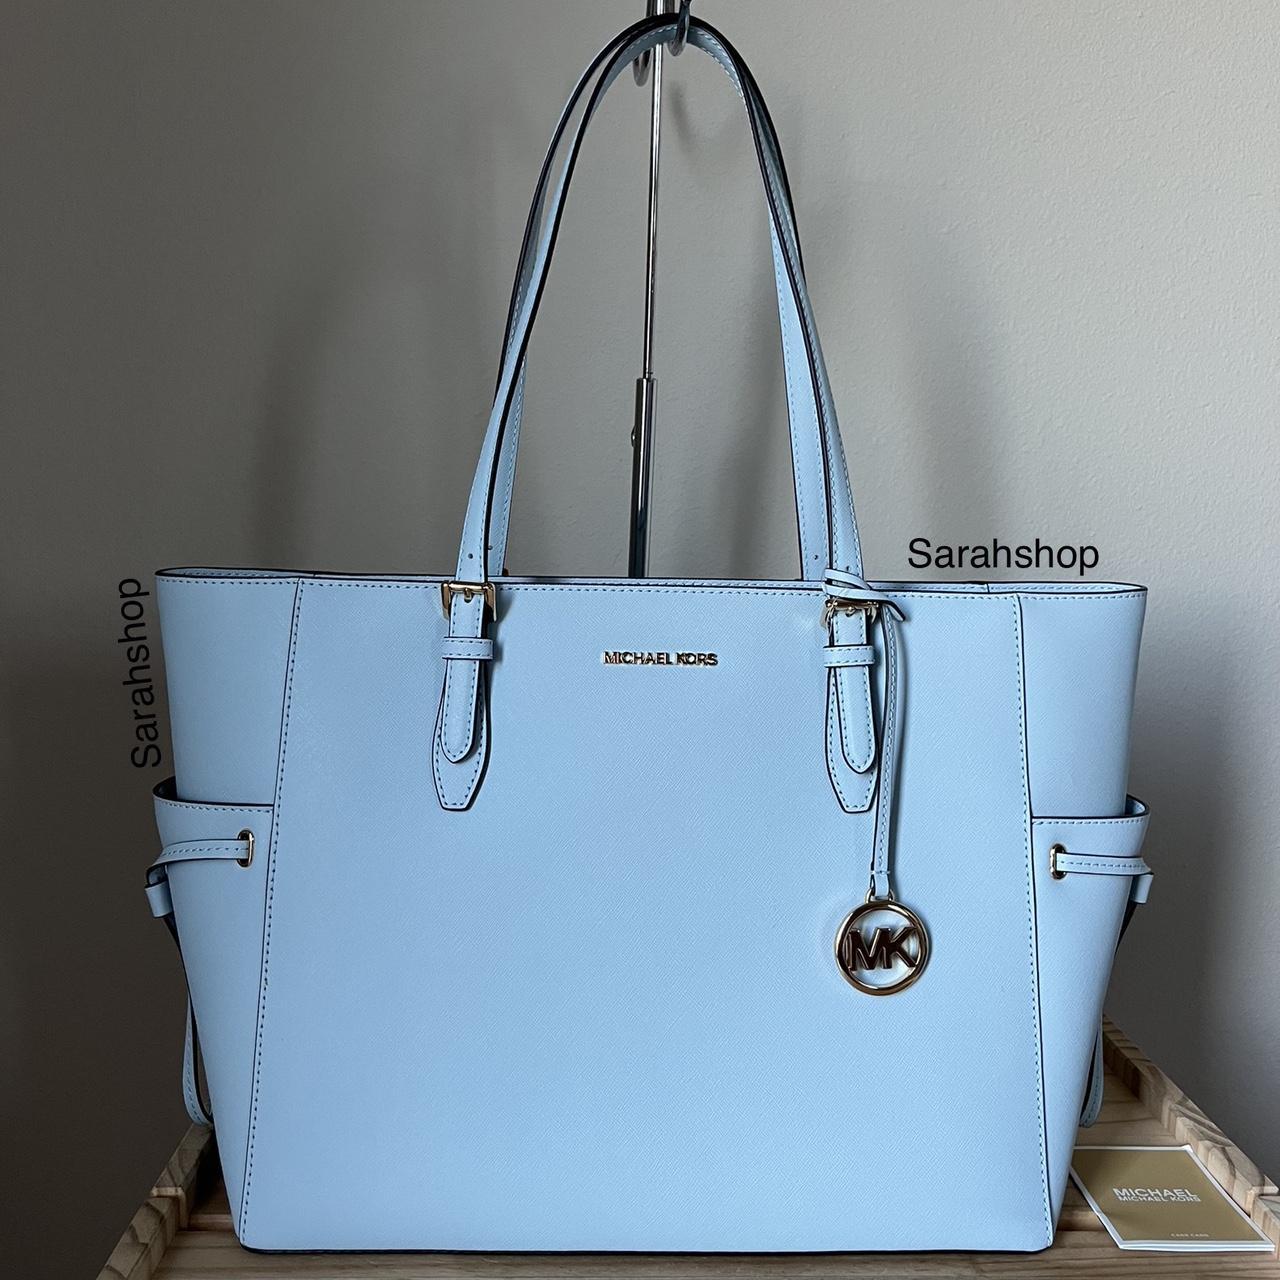 Why are Michael Kors bags so popular? – LINVELLES